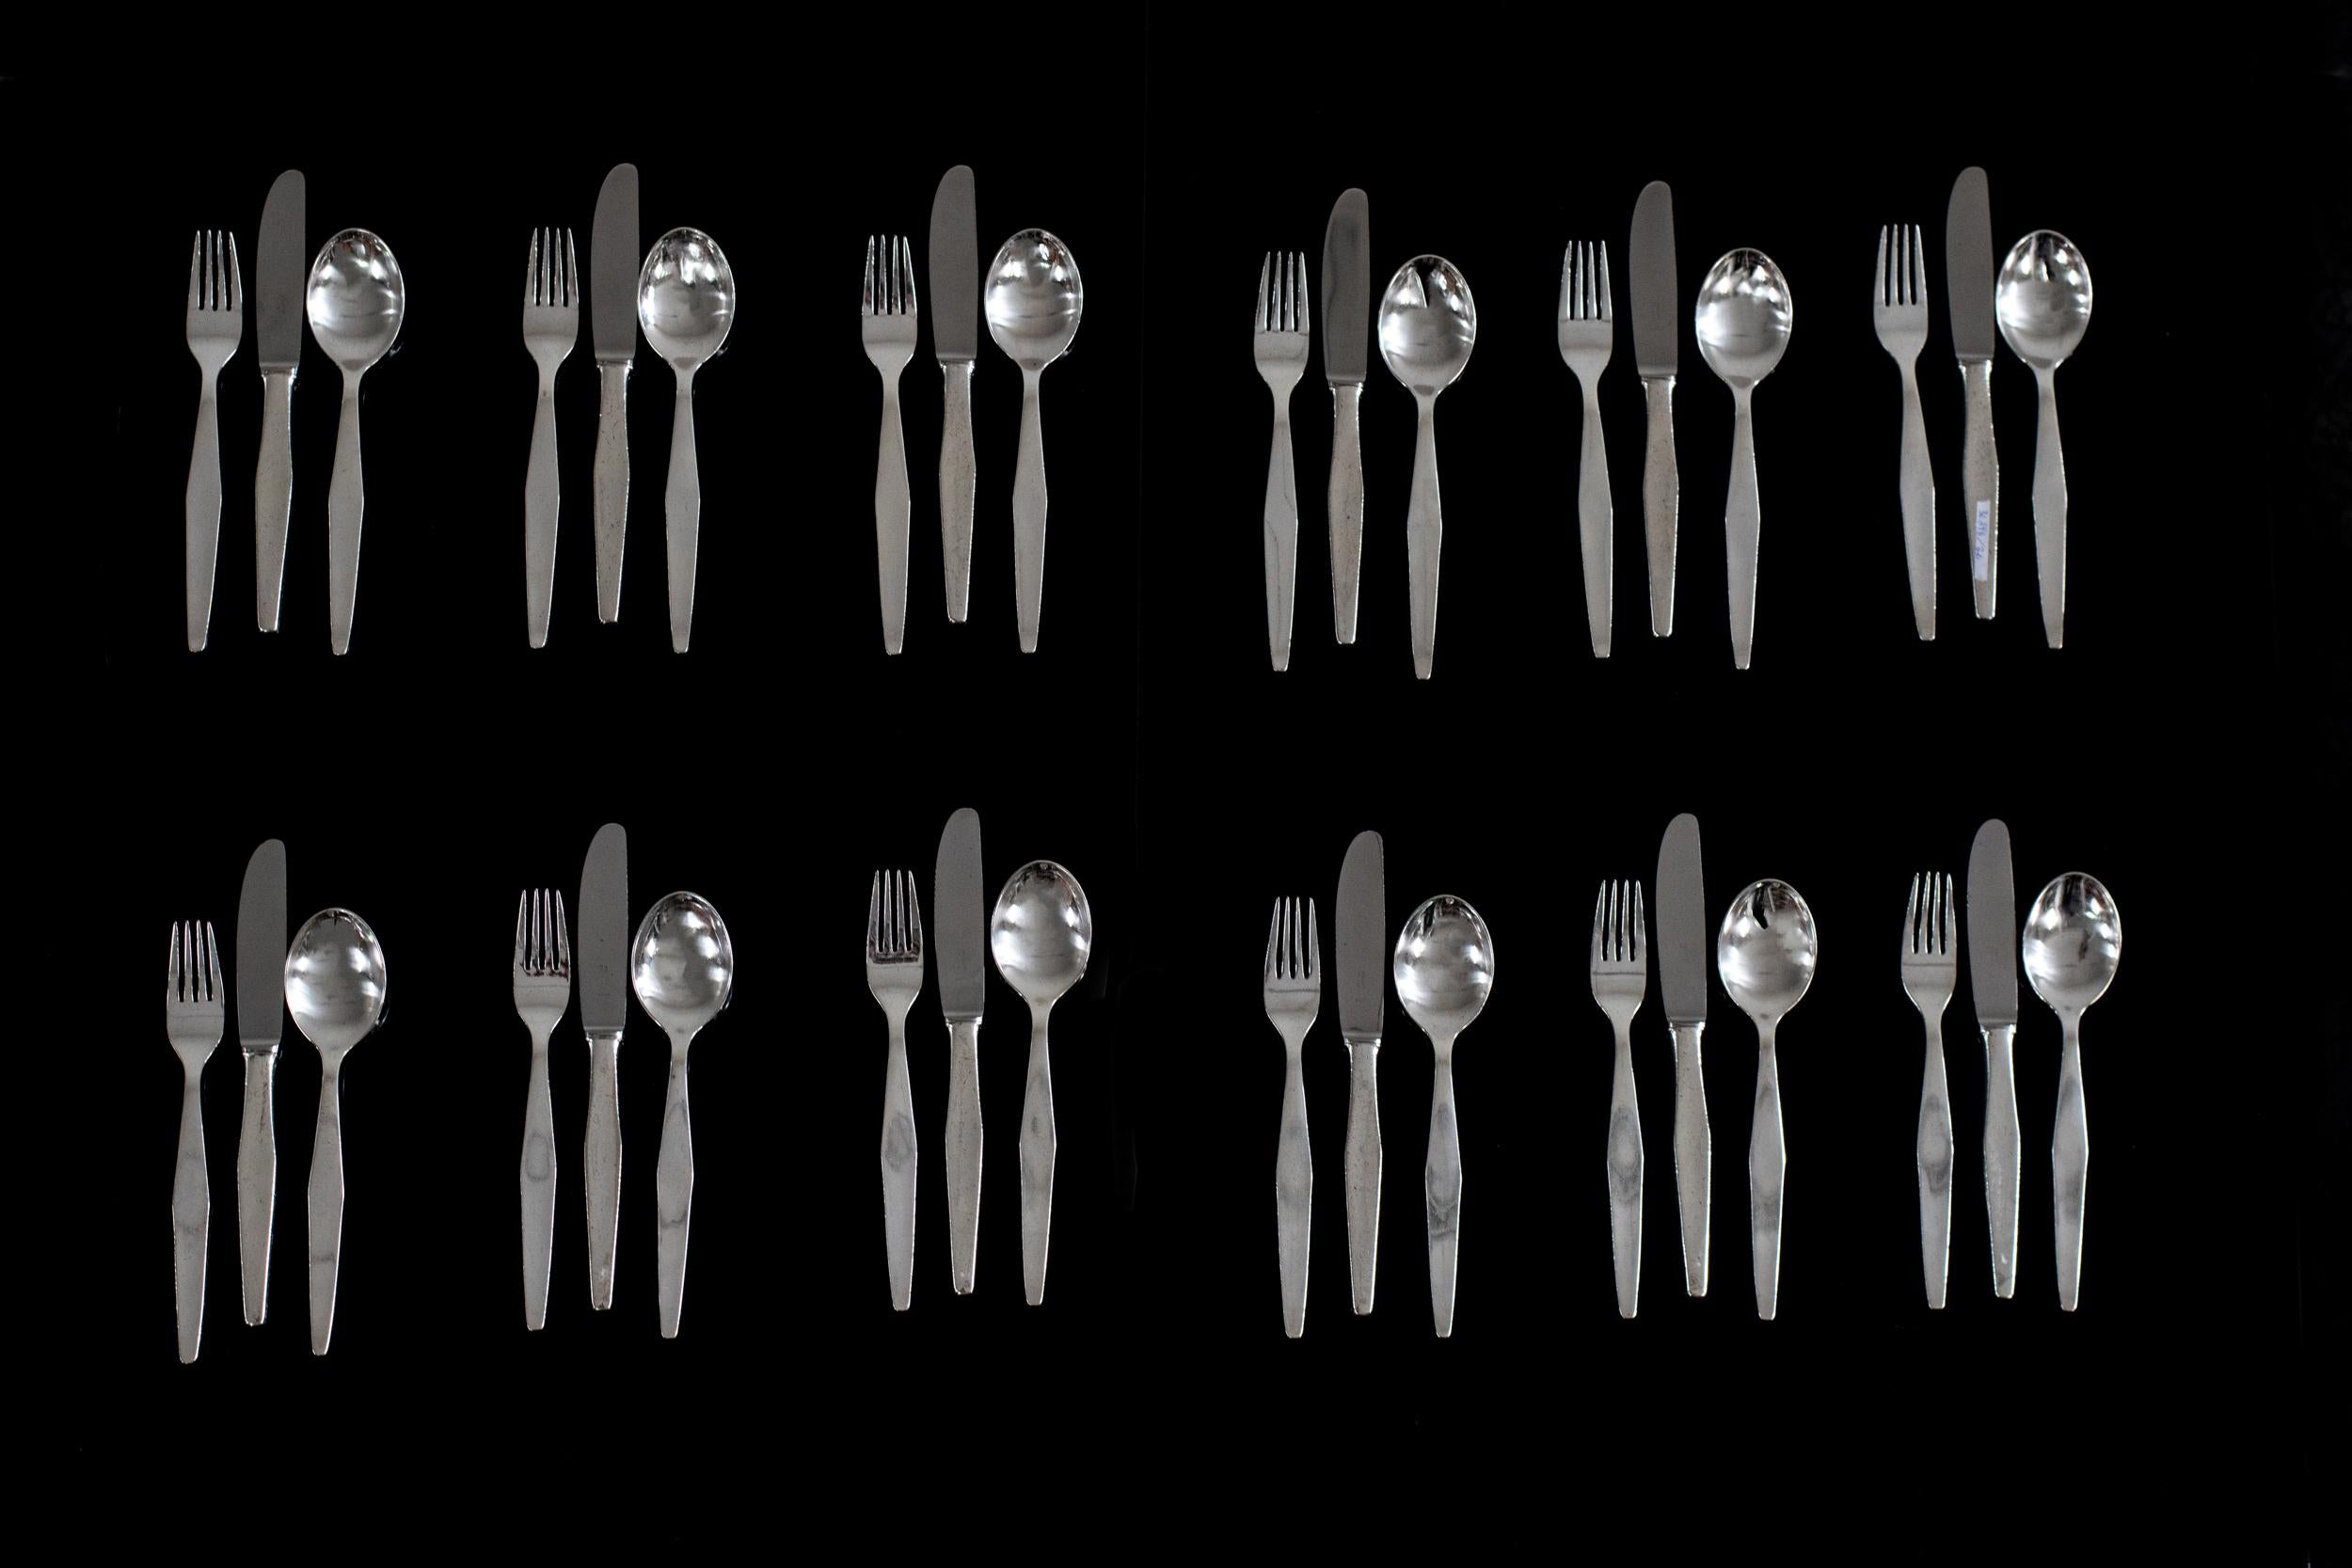 Cutlery silver set for twelve in nickel silver or German silver, this set includes a total of 36 pieces; 12 spoons, 12 forks, and 12 knives with a steel blade. 

Set designed by Gio Ponti for several hotels like the Granada, Solemare, and Murex,